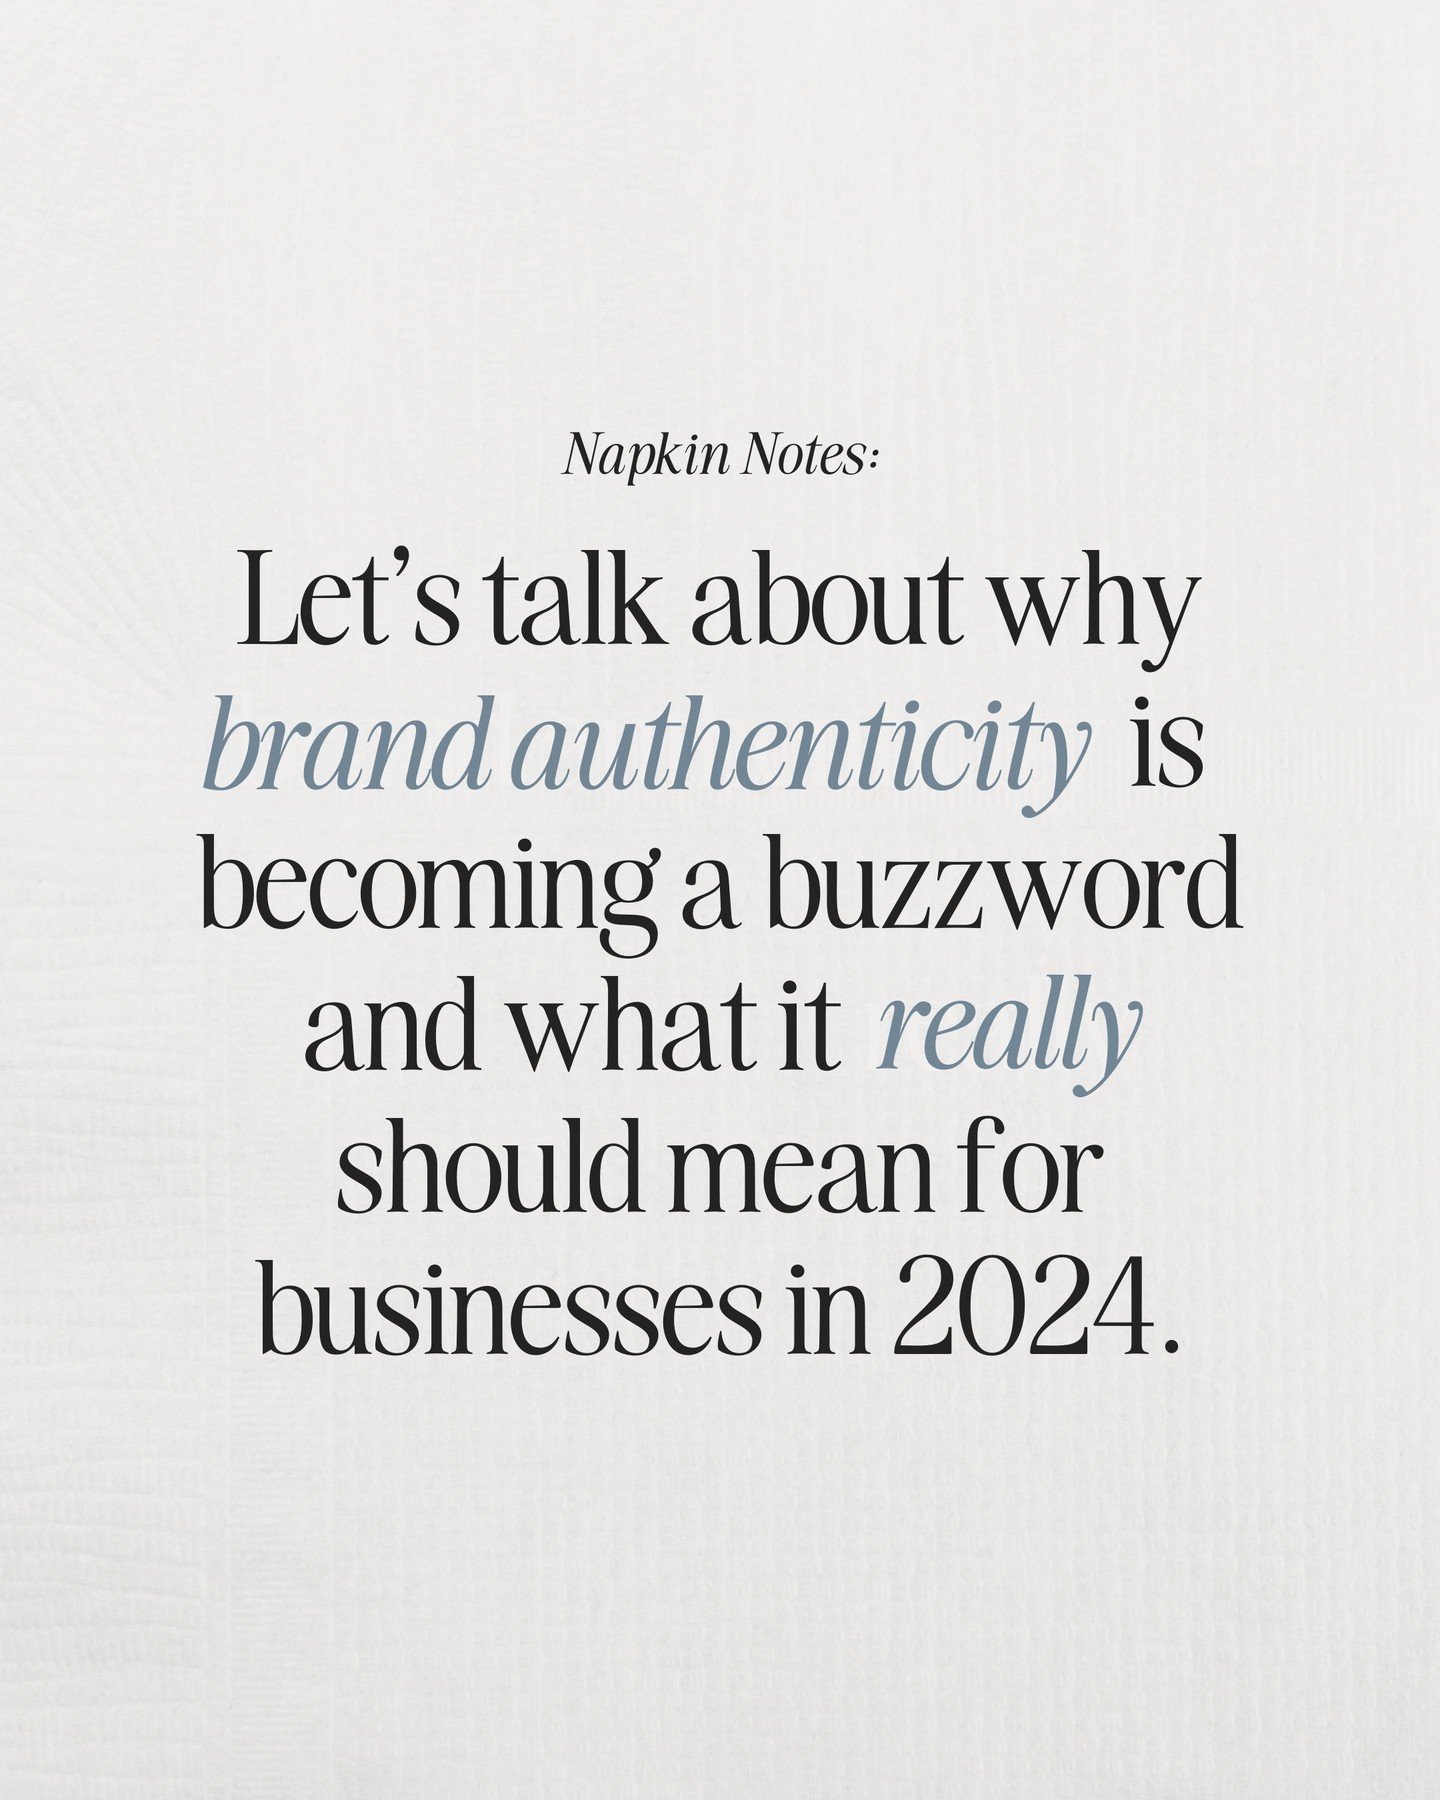 Let&rsquo;s talk about why 'brand authenticity' is becoming a buzzword and what it really should mean for businesses in 2024.

Brand authenticity is one of those topics people LOVE to make more complicated than it needs to be.
But it doesn&rsquo;t ha